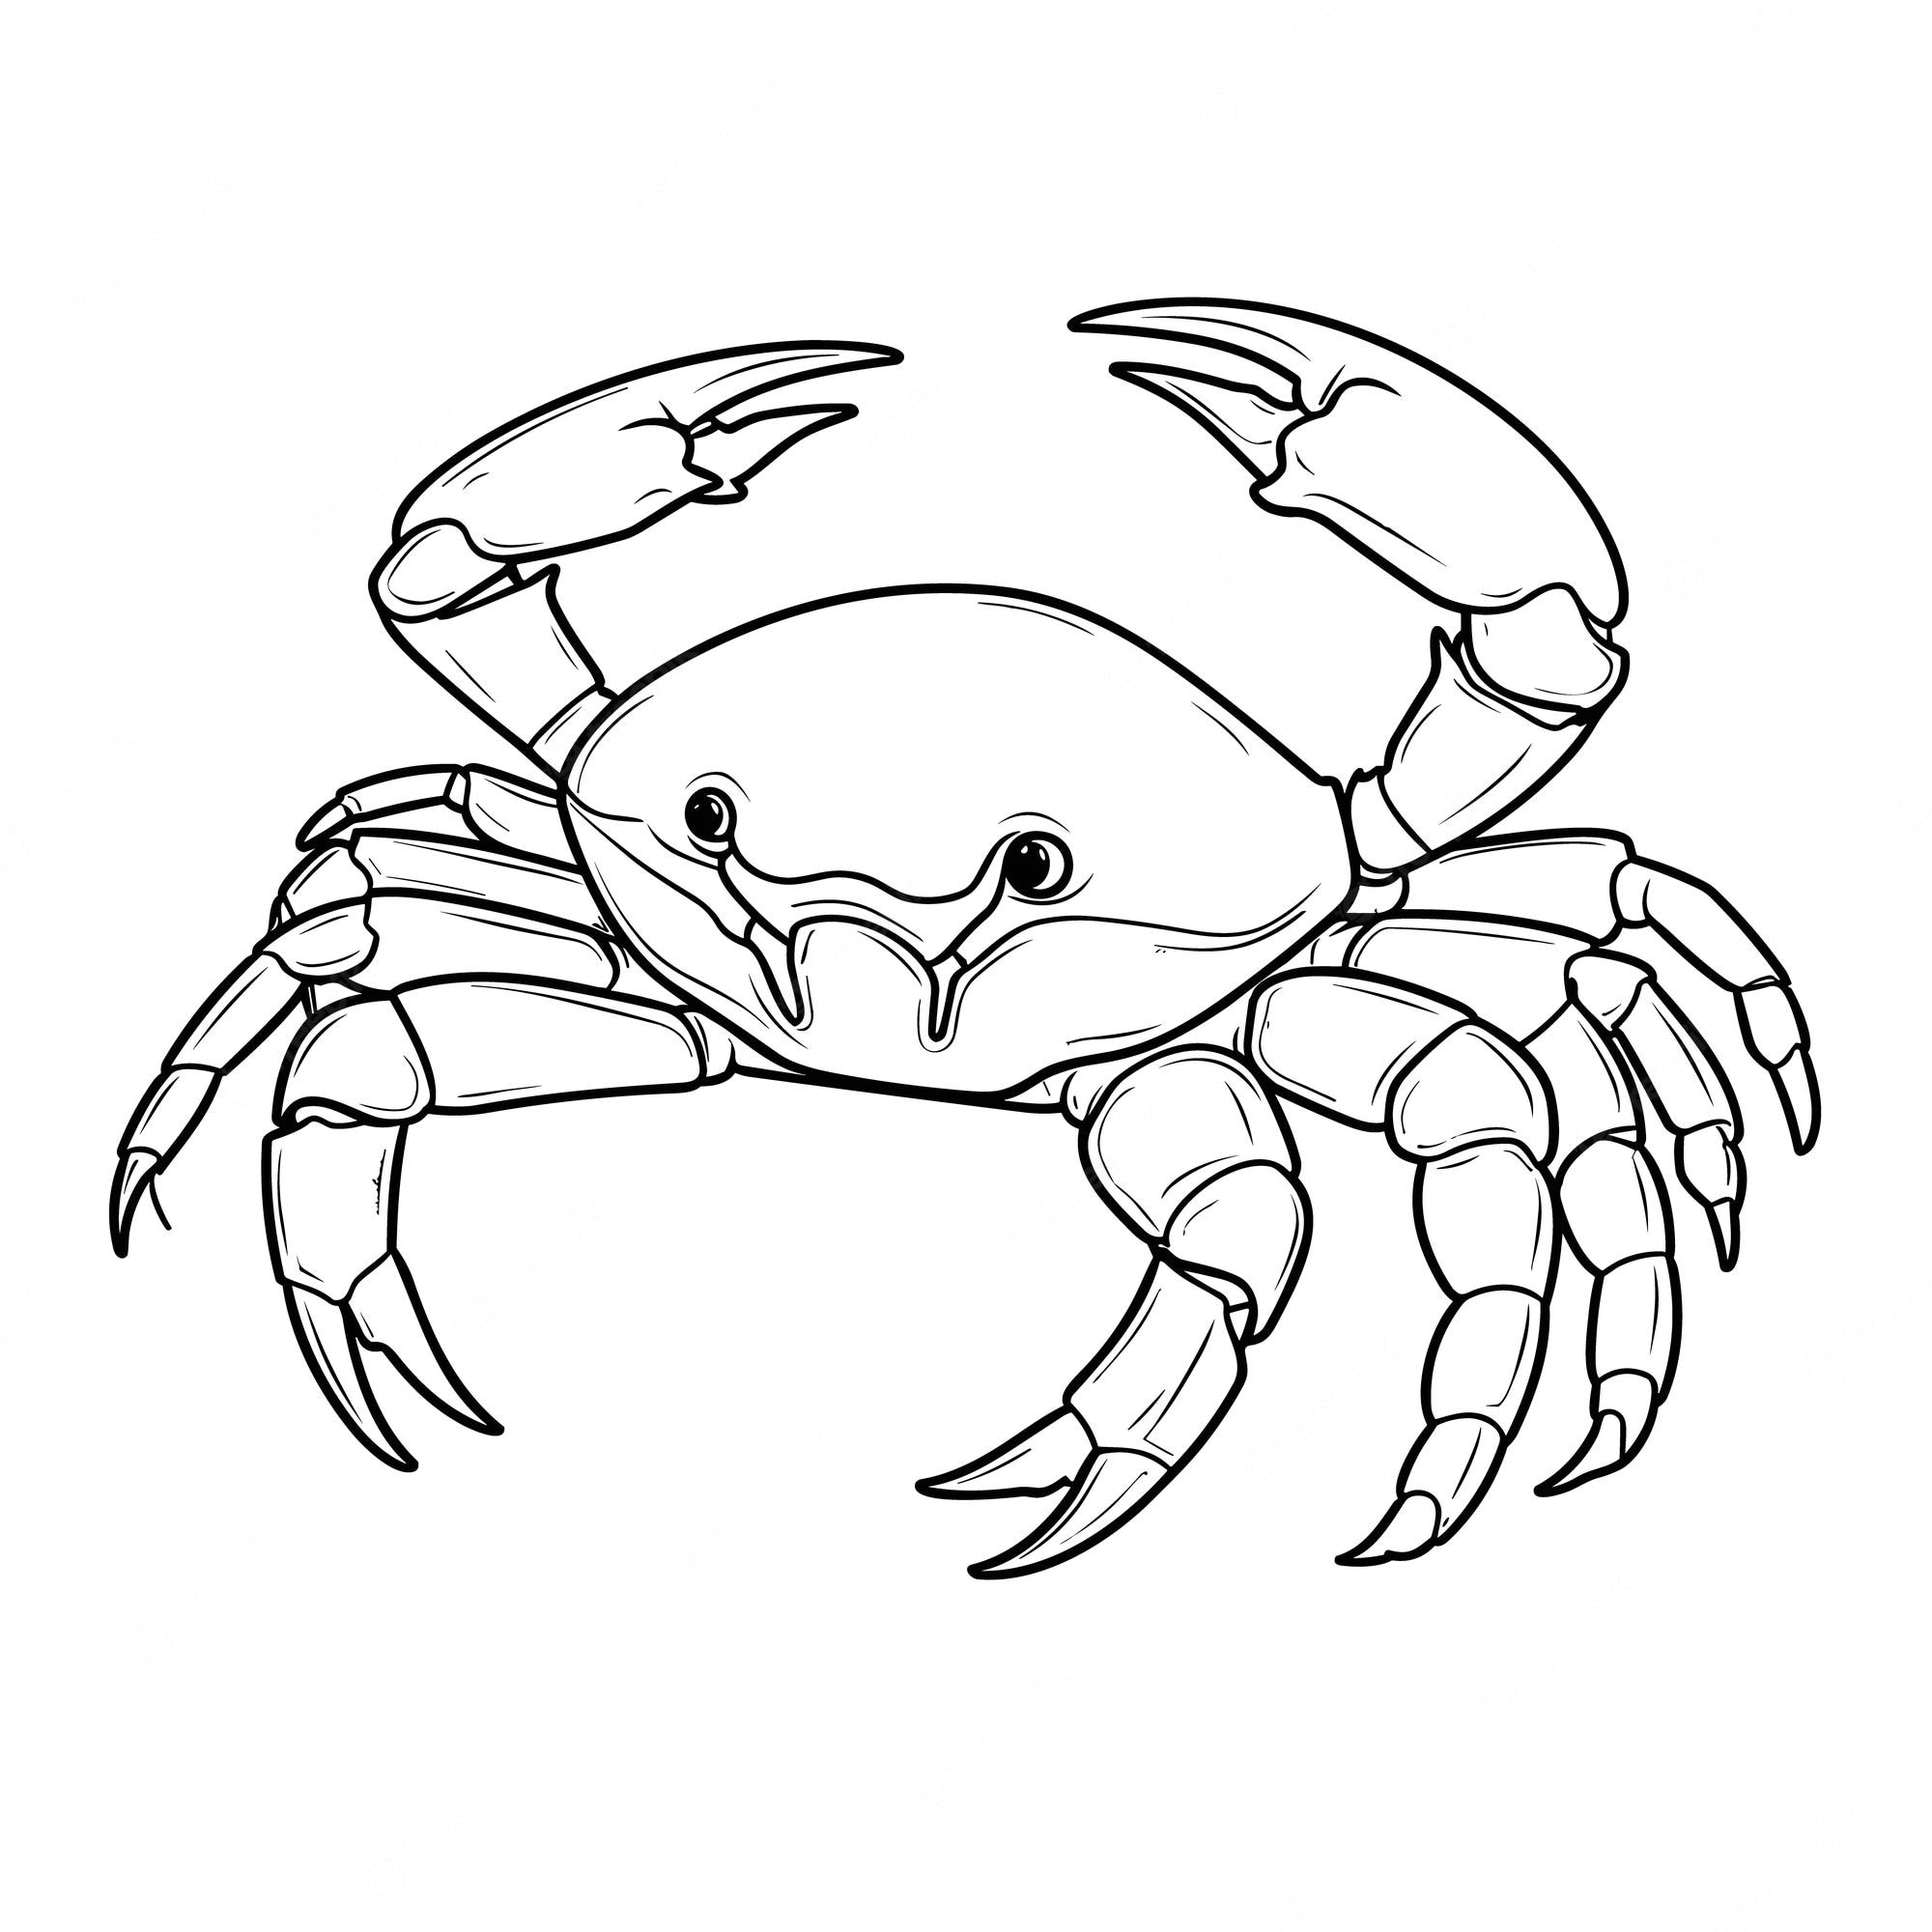 Premium Vector | Chili crab singapore coloring pages for kid